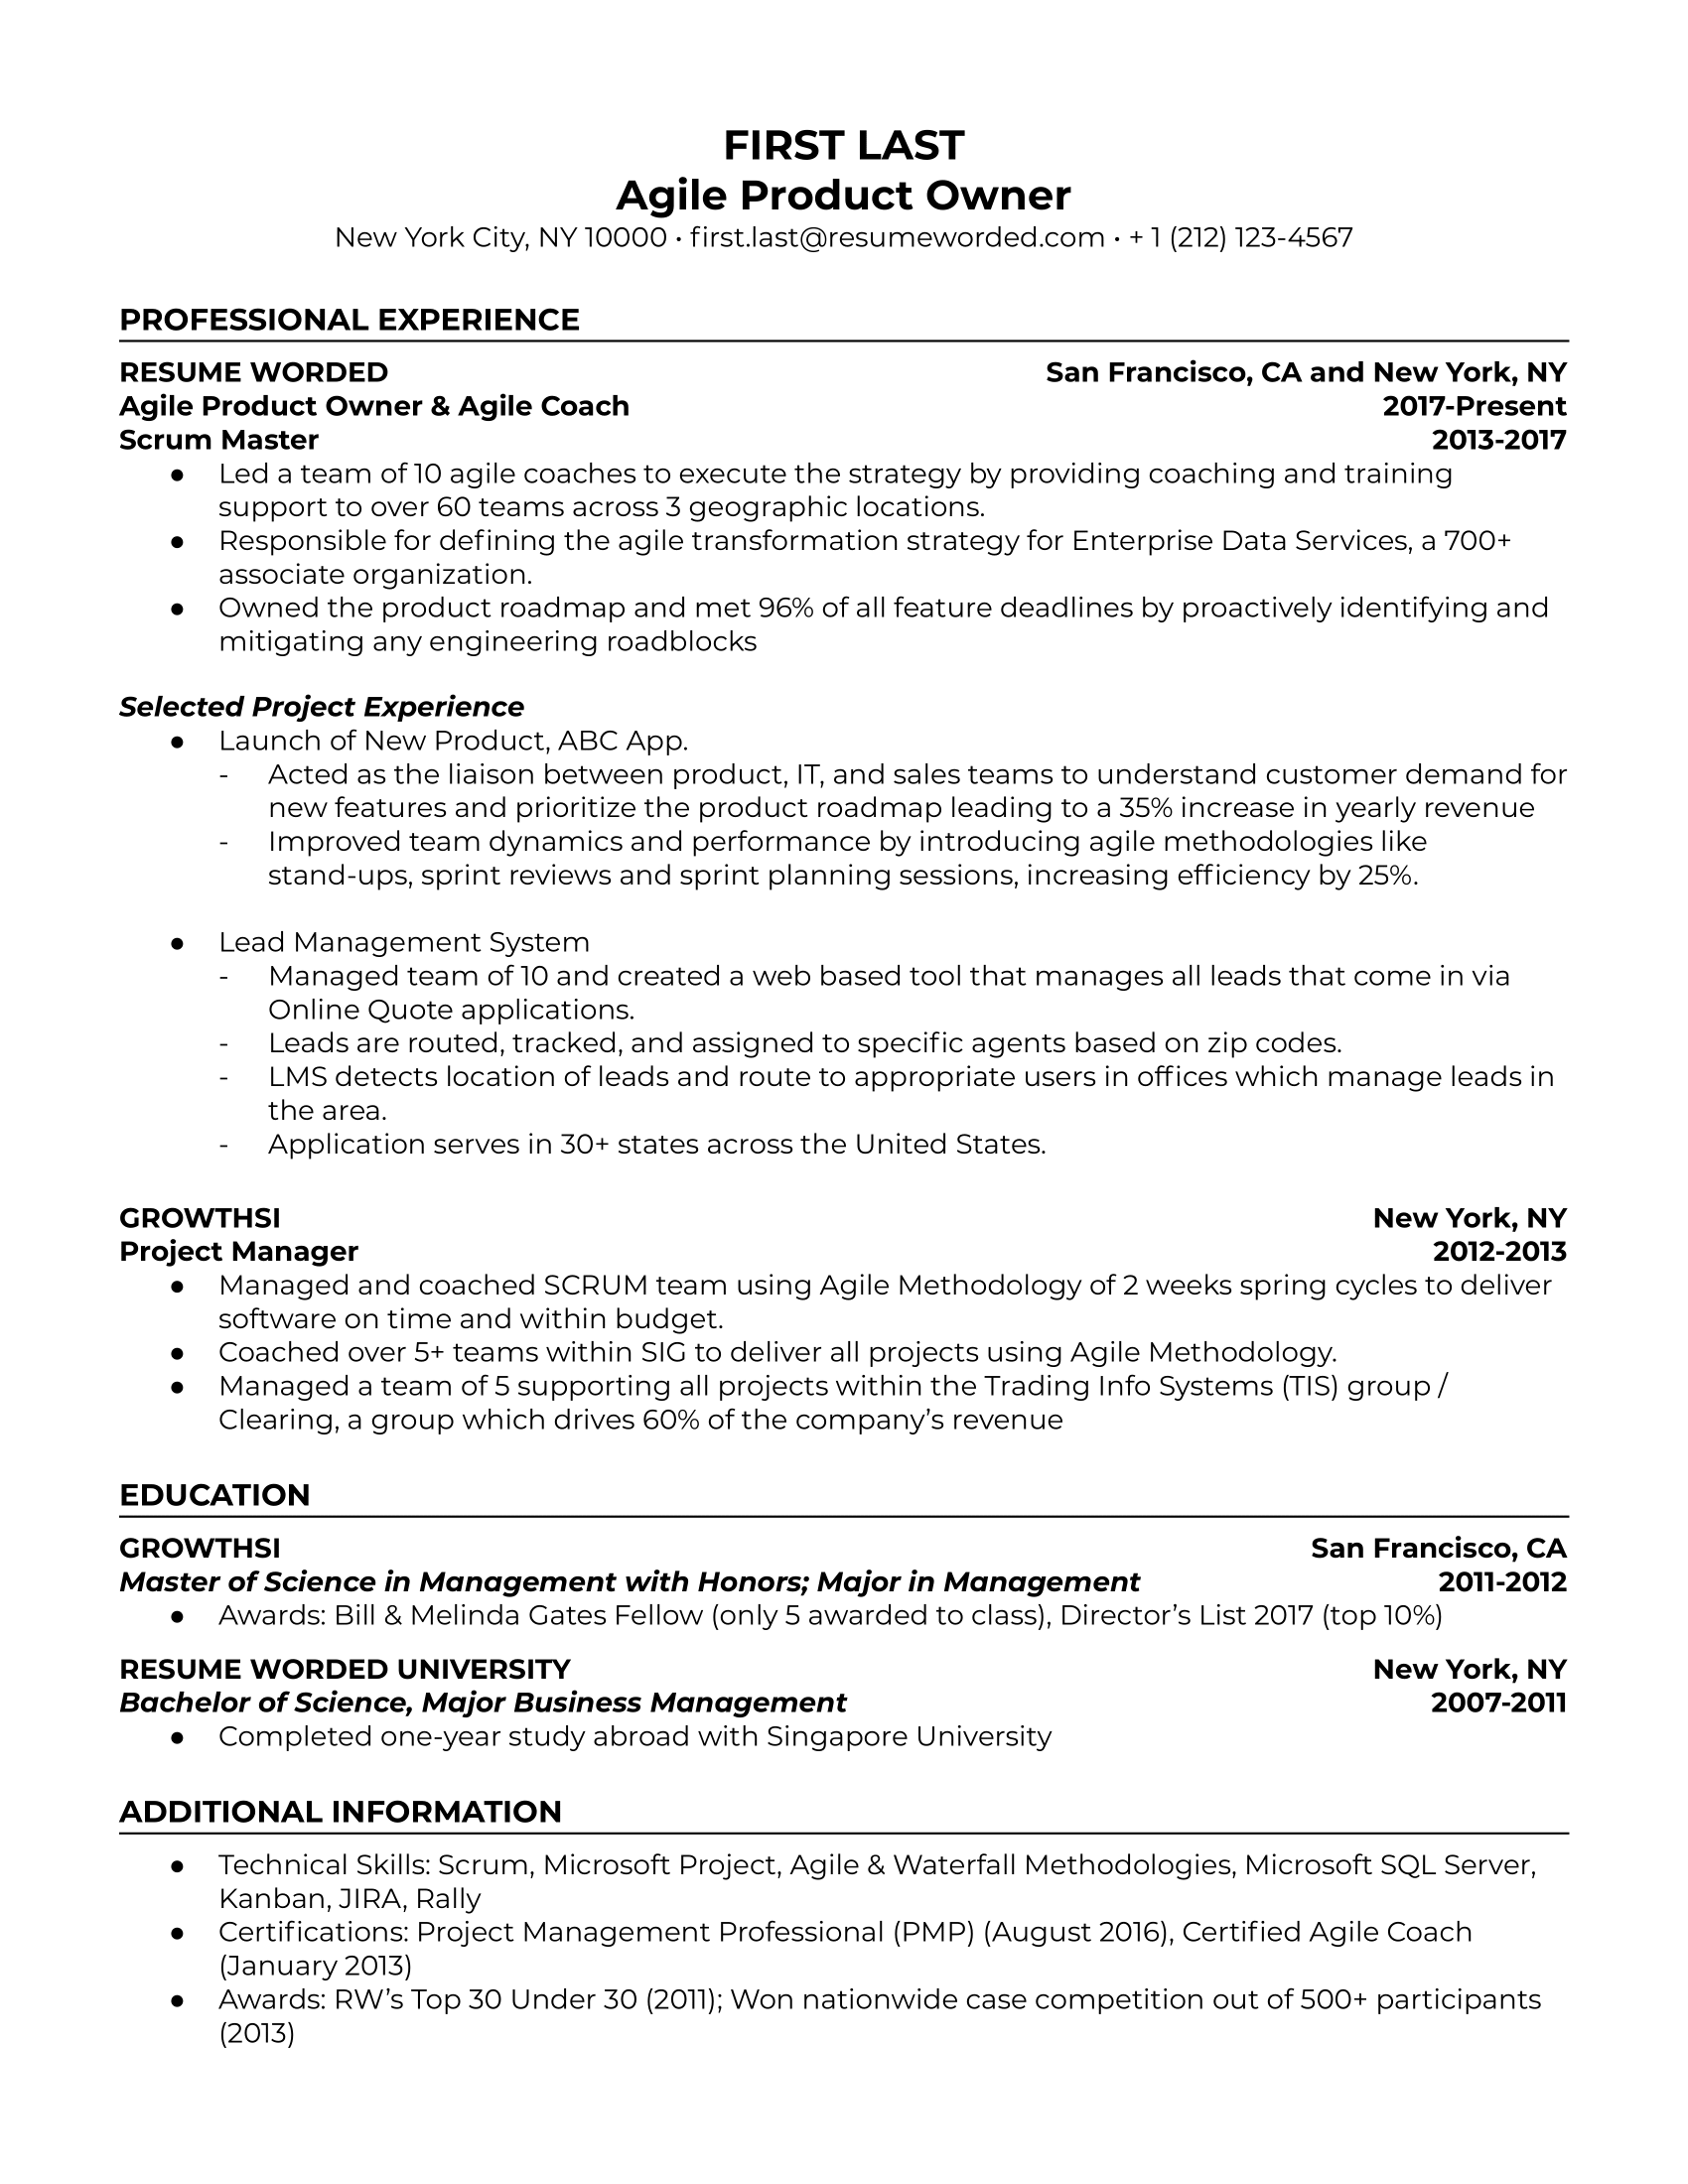 Agile Product Owner Resume Template + Example